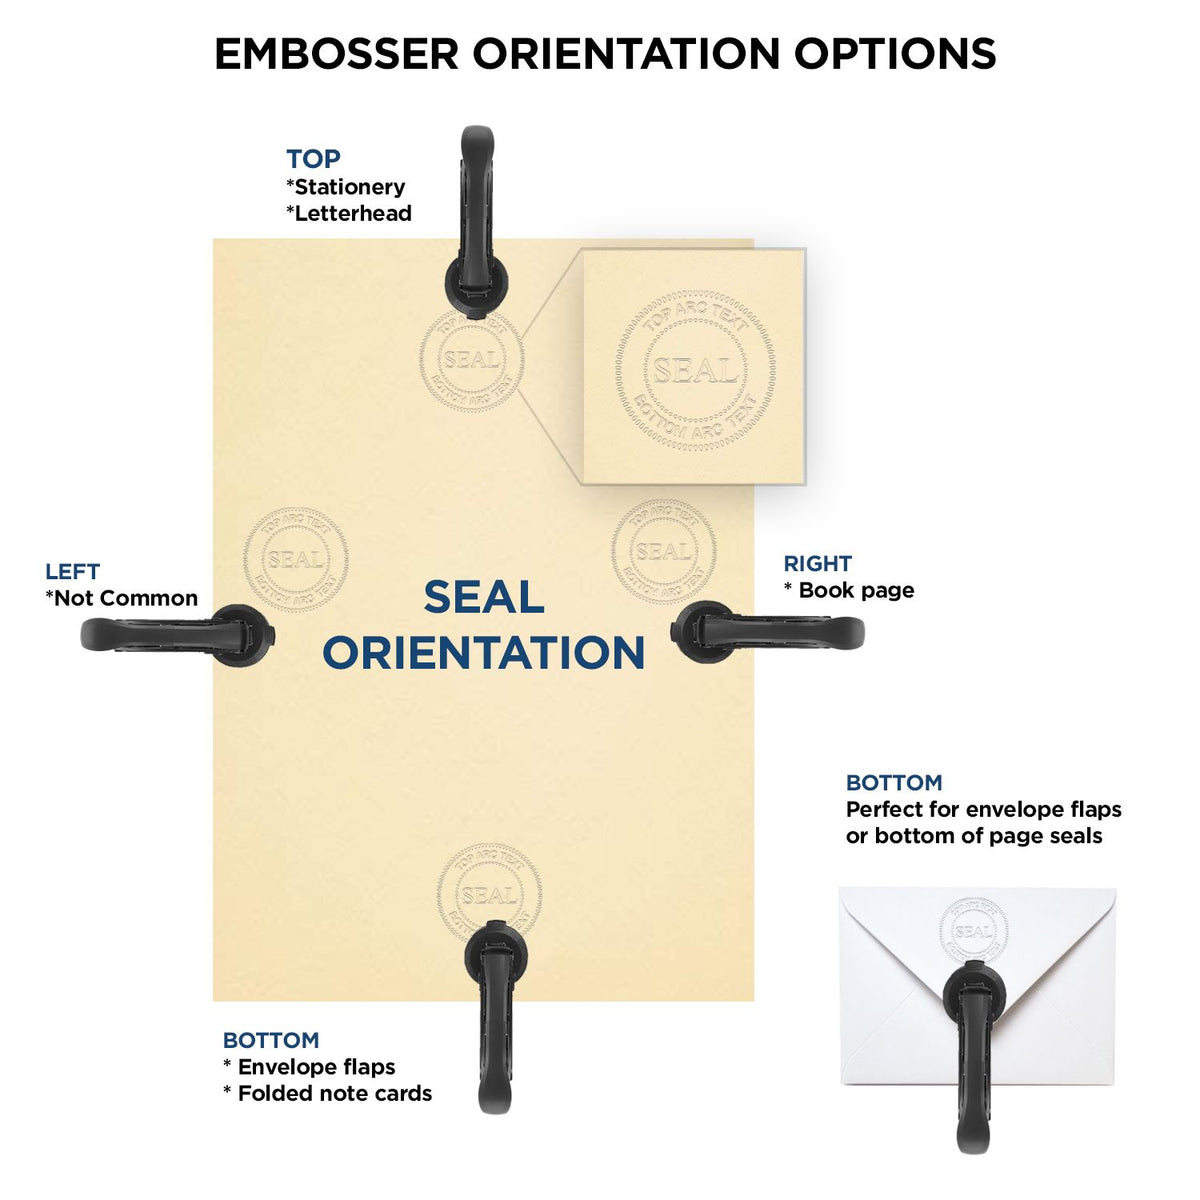 An infographic for the State of Alaska Extended Long Reach Geologist Seal showing embosser orientation, this is showing examples of a top, bottom, right and left insert.